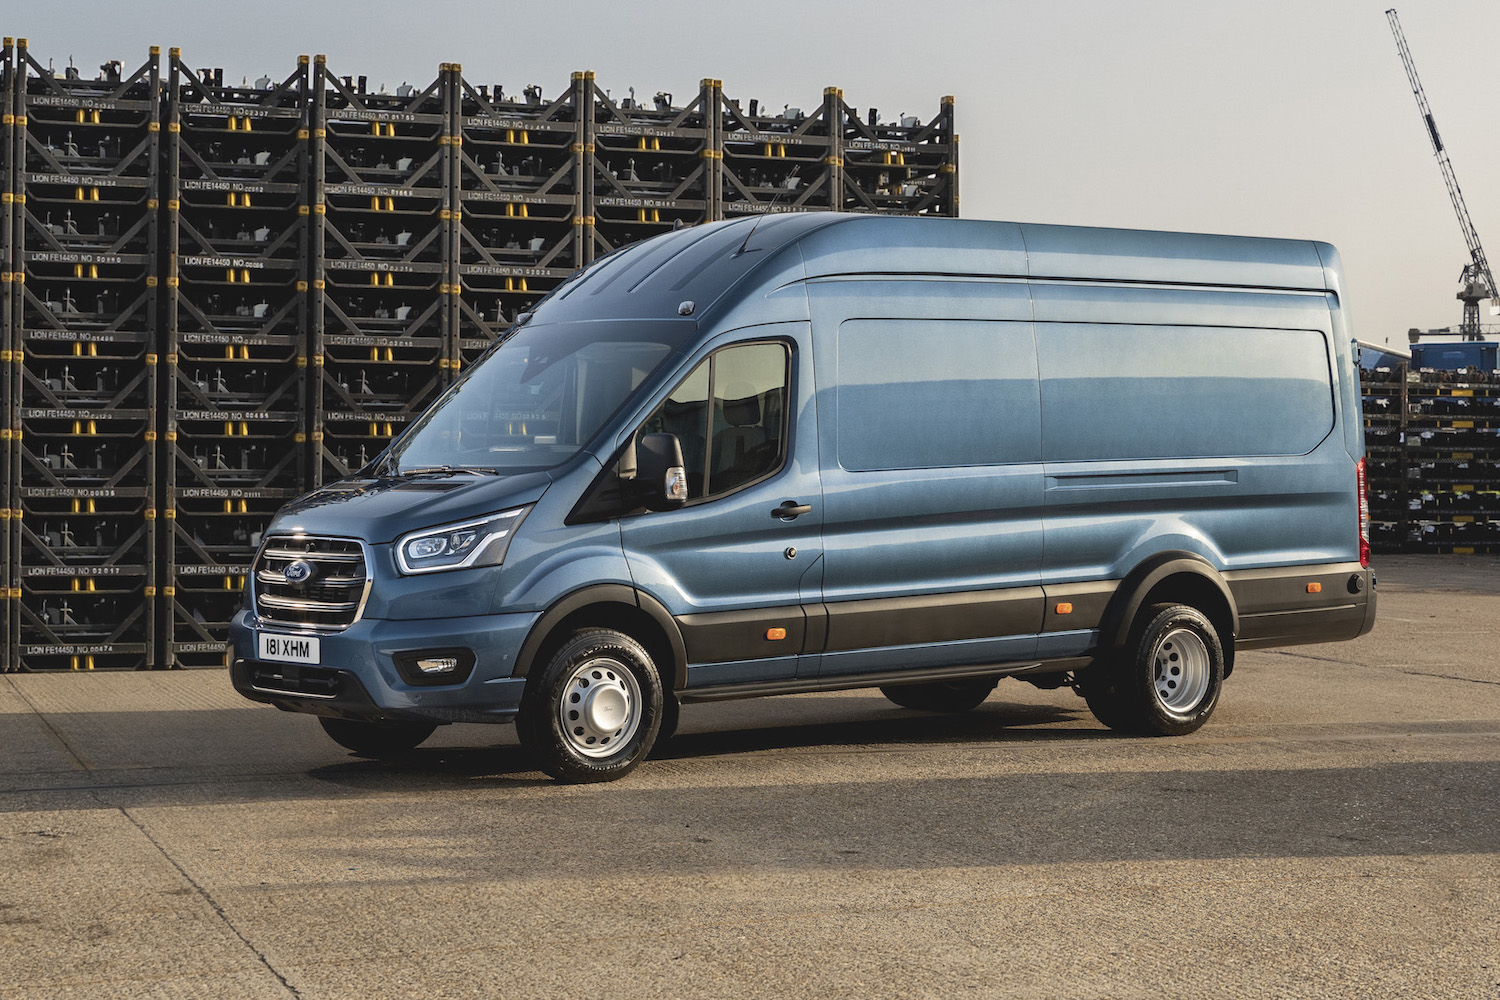 Features | How to choose the right van | CompleteVan.ie